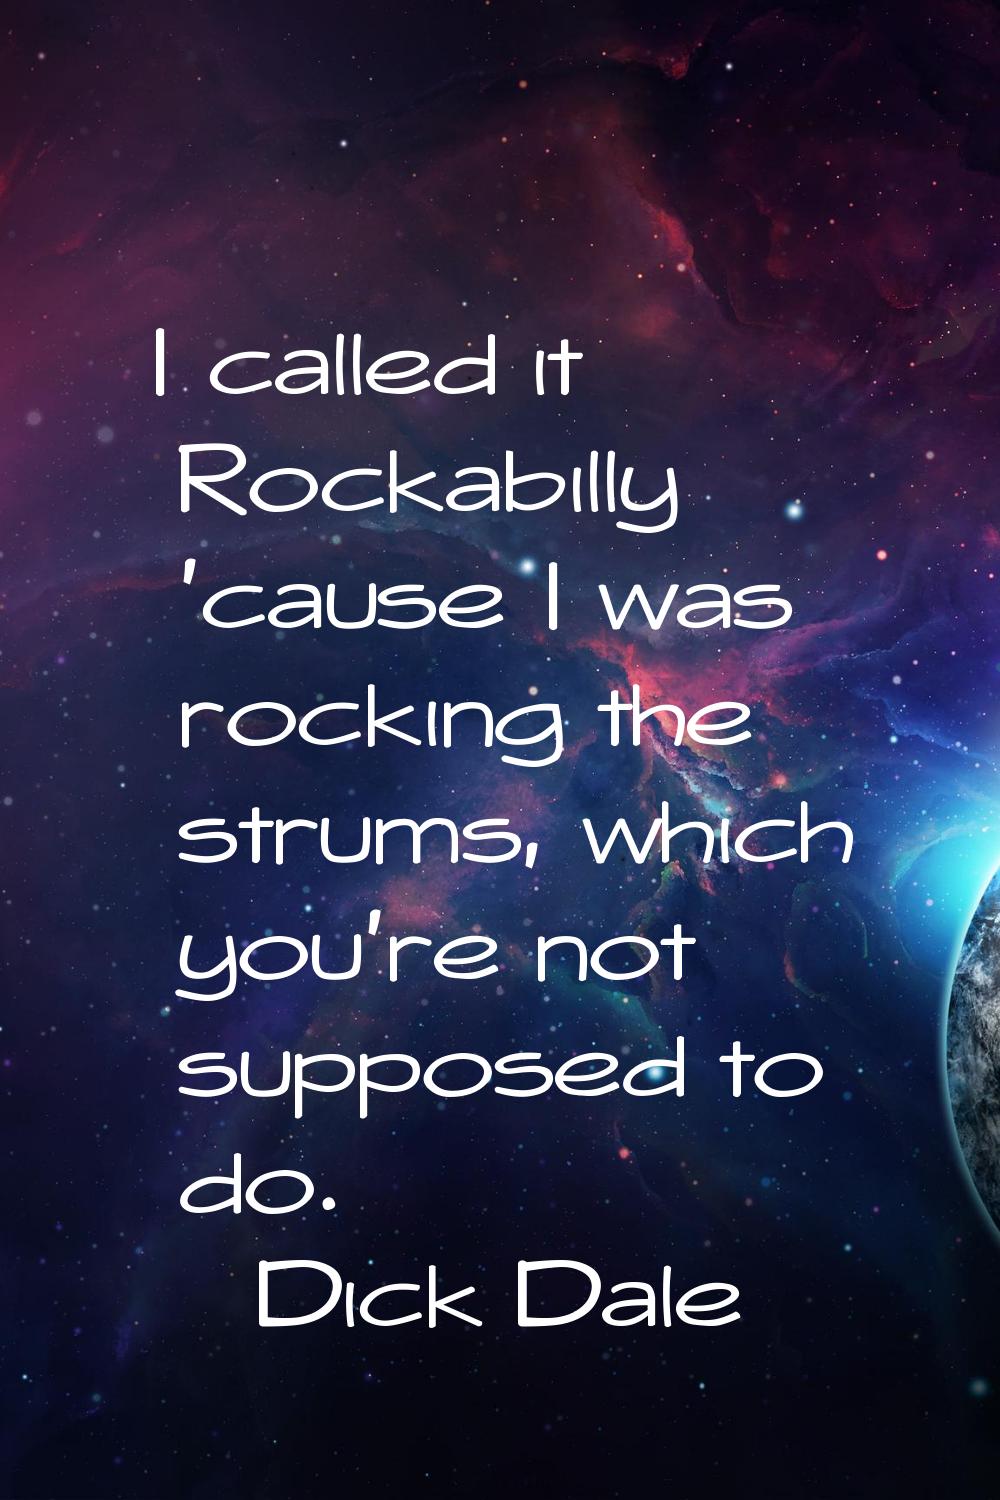 I called it Rockabilly 'cause I was rocking the strums, which you're not supposed to do.